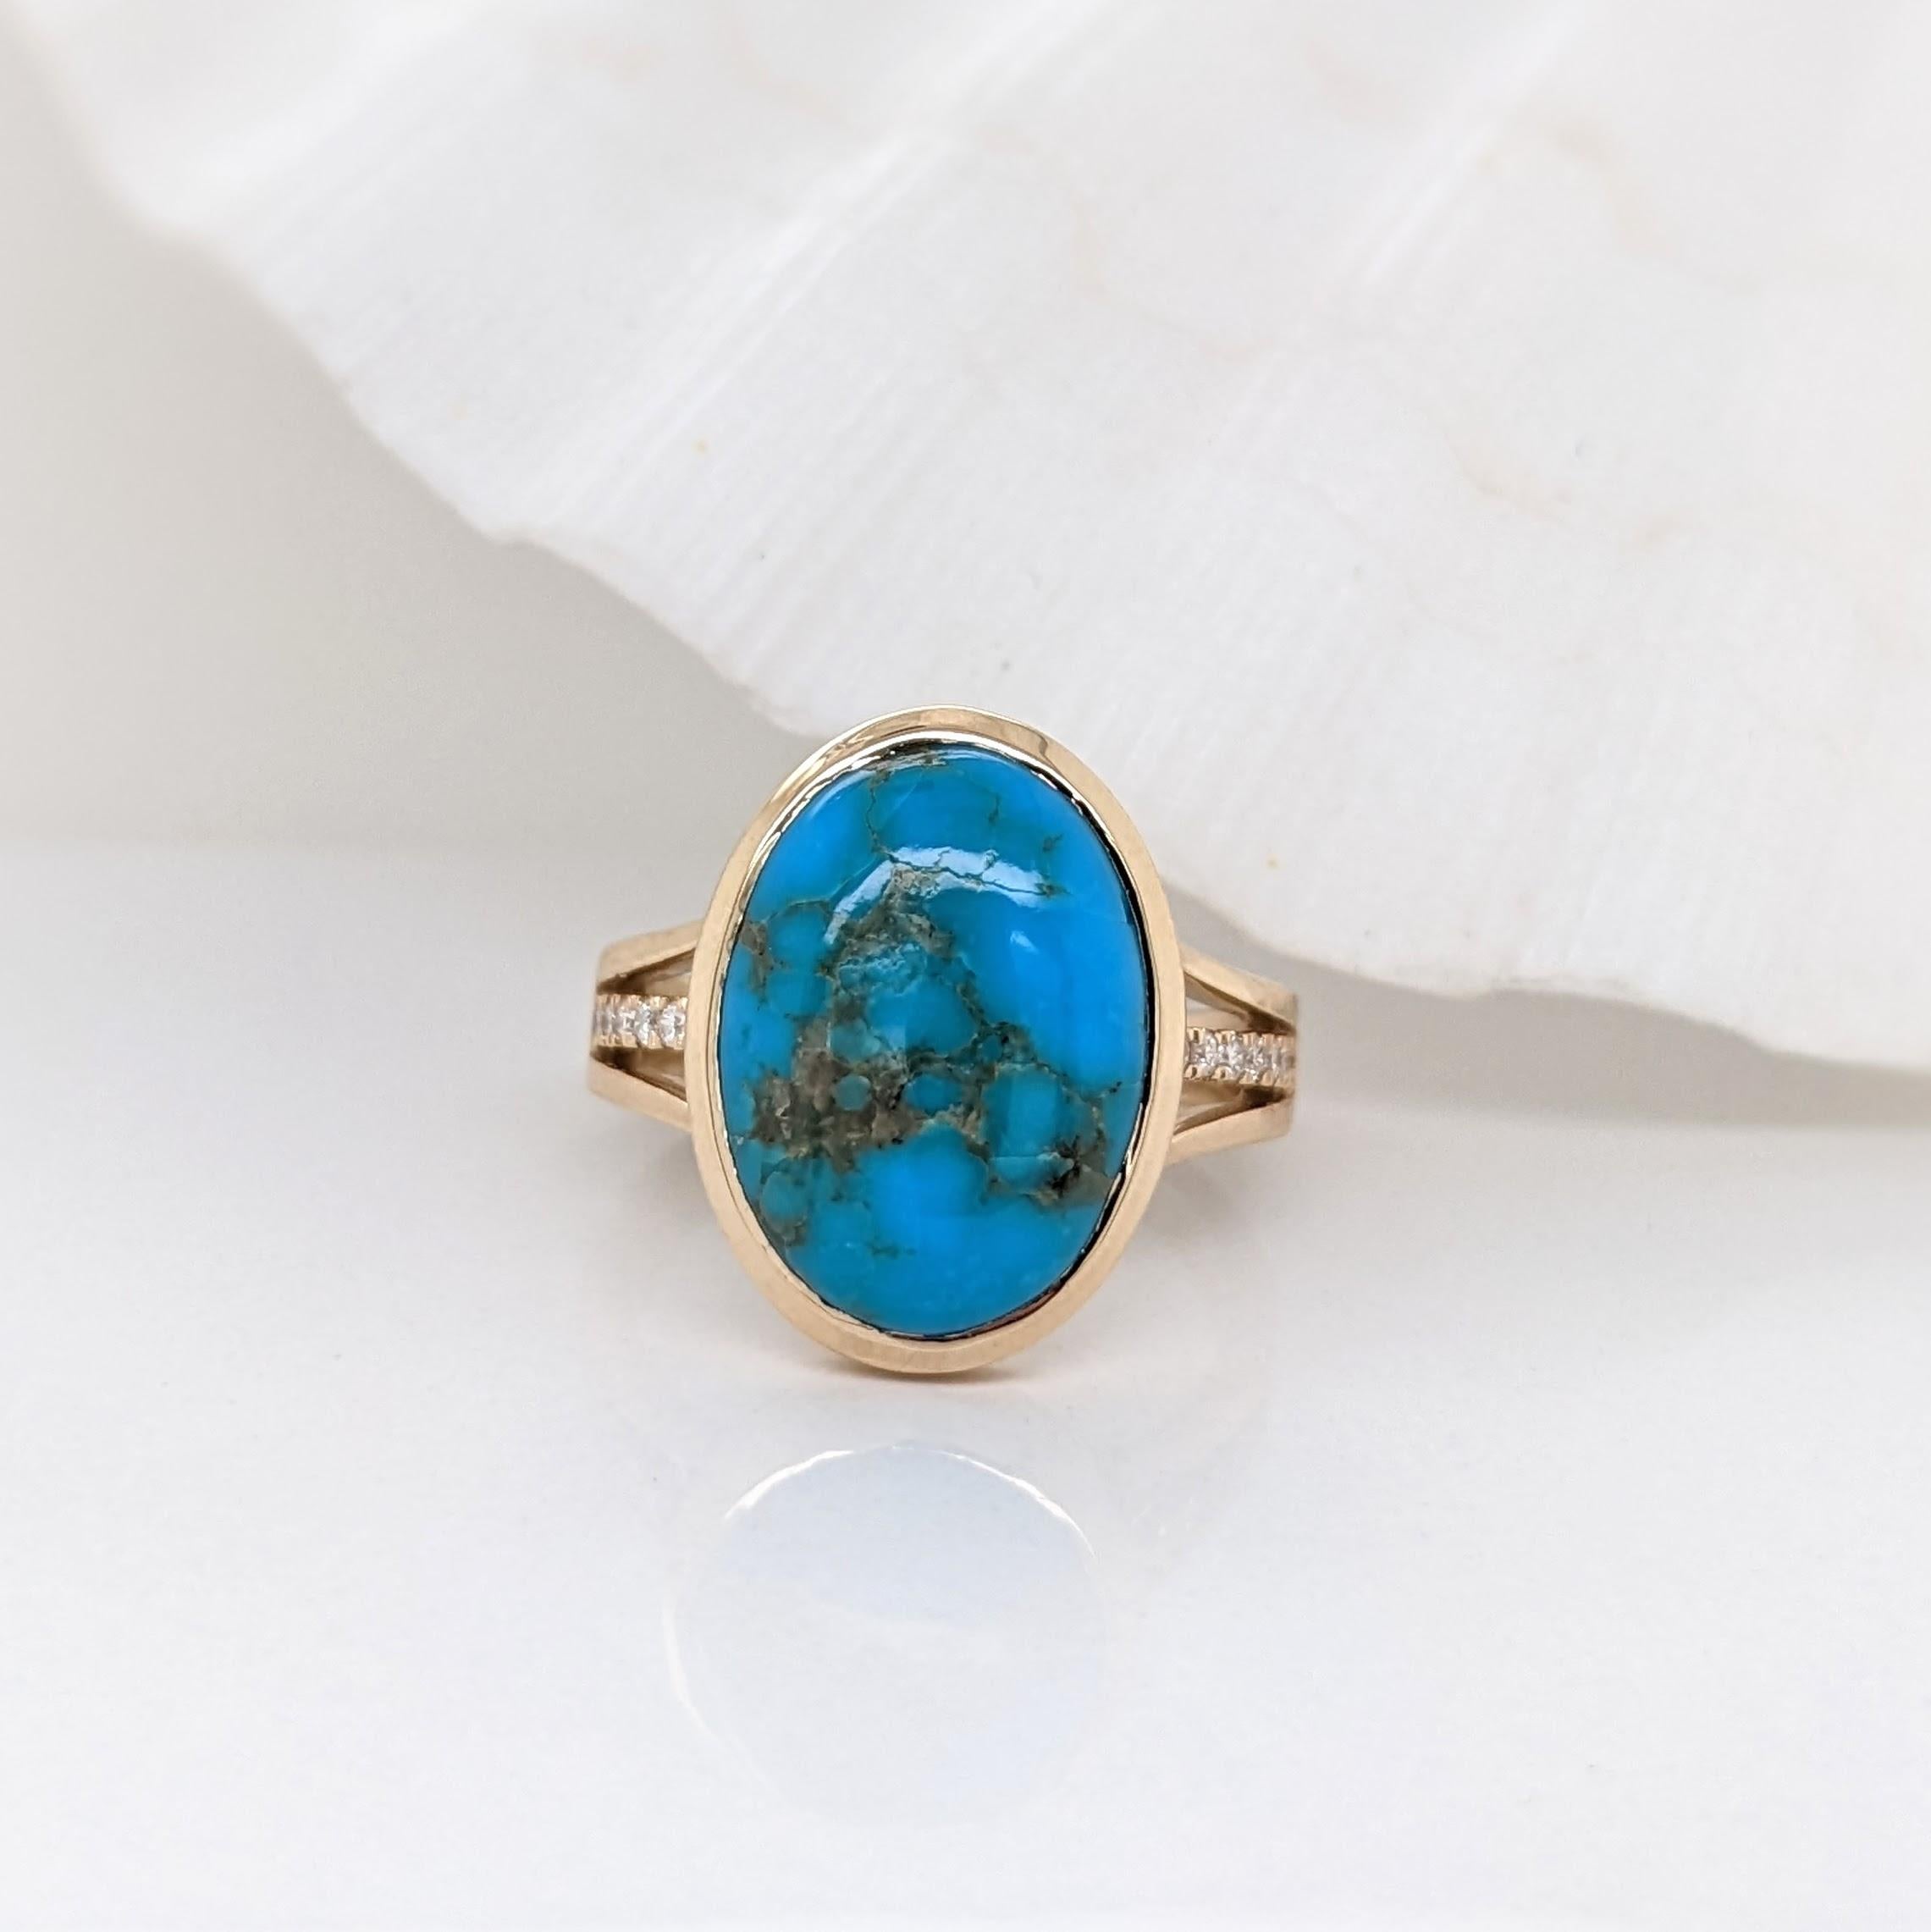 This 14k solid Gold ring features a beautiful 16x12mm Turquoise center stone with a Milgrain detail split shank. This unique piece is perfect for daily wear.

Specifications

Item Type: Ring
Center Stone: Turquoise
Treatment: Impregnated
Weight: